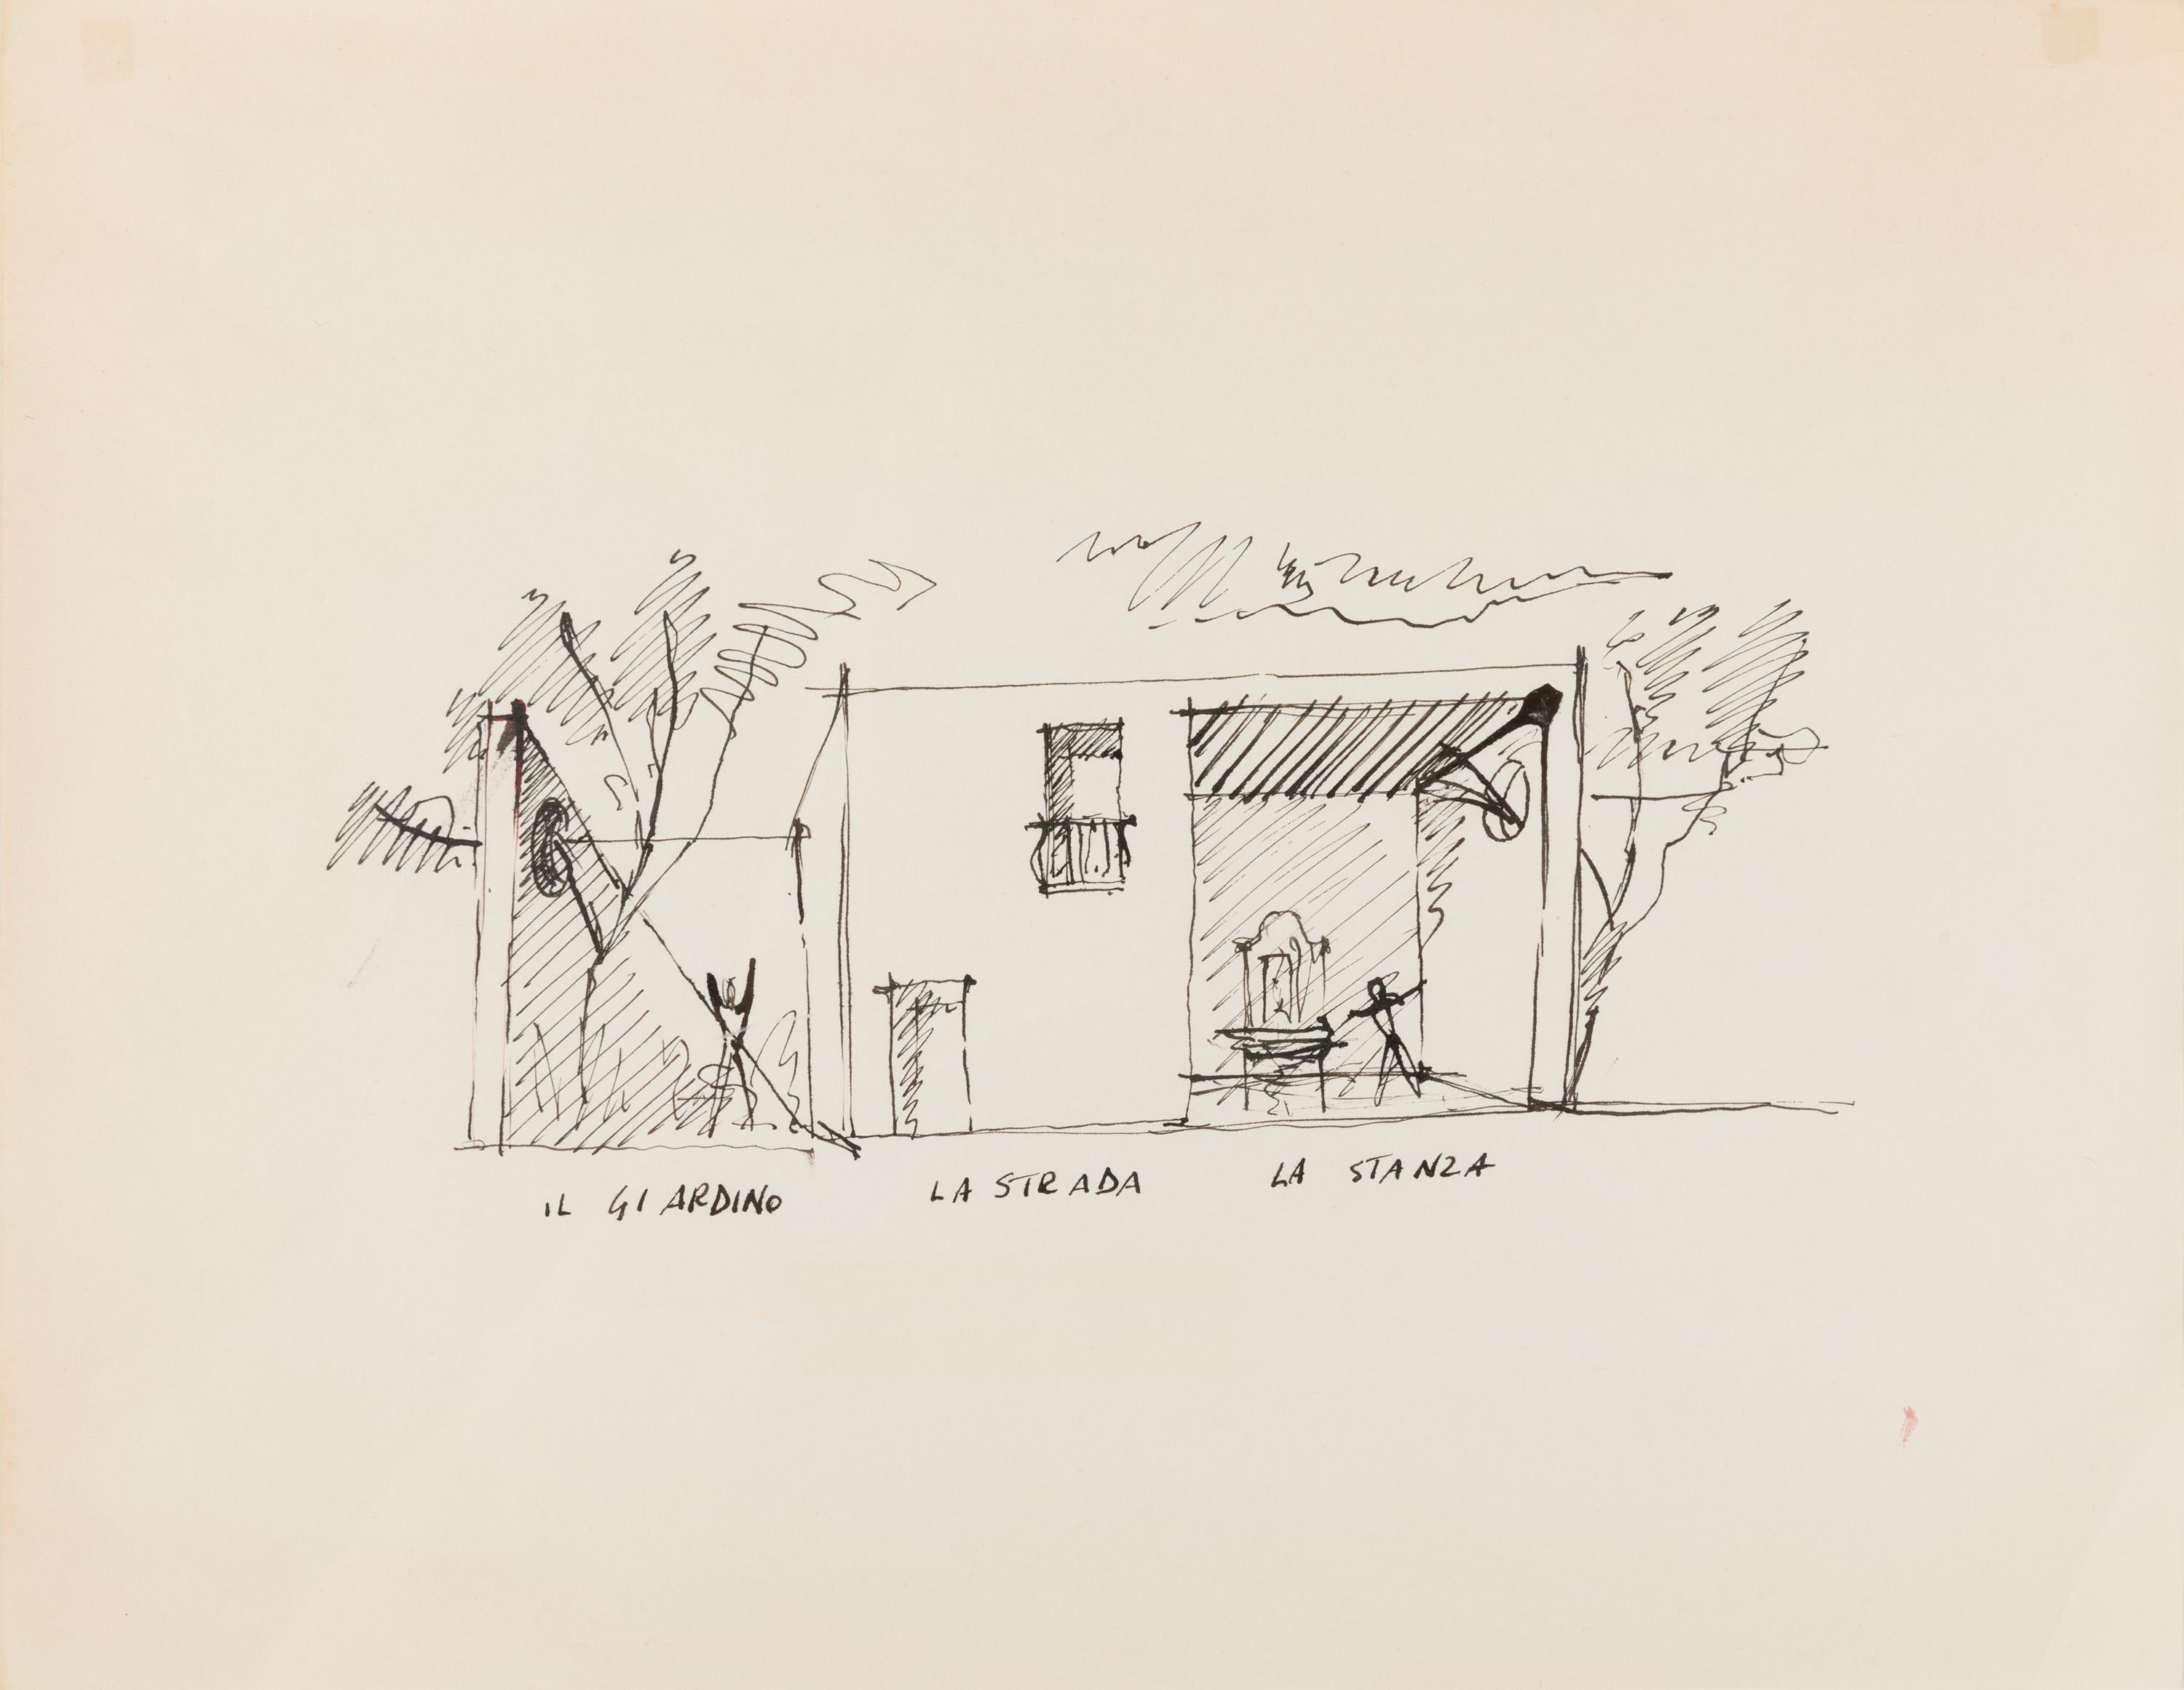 Gio Ponti had a significant impact on the residential housing in Bordighera, Italy. This is a wonderful architectural rendering from one of those homes. The drawing comes with authentication from the Gio Ponti archives.